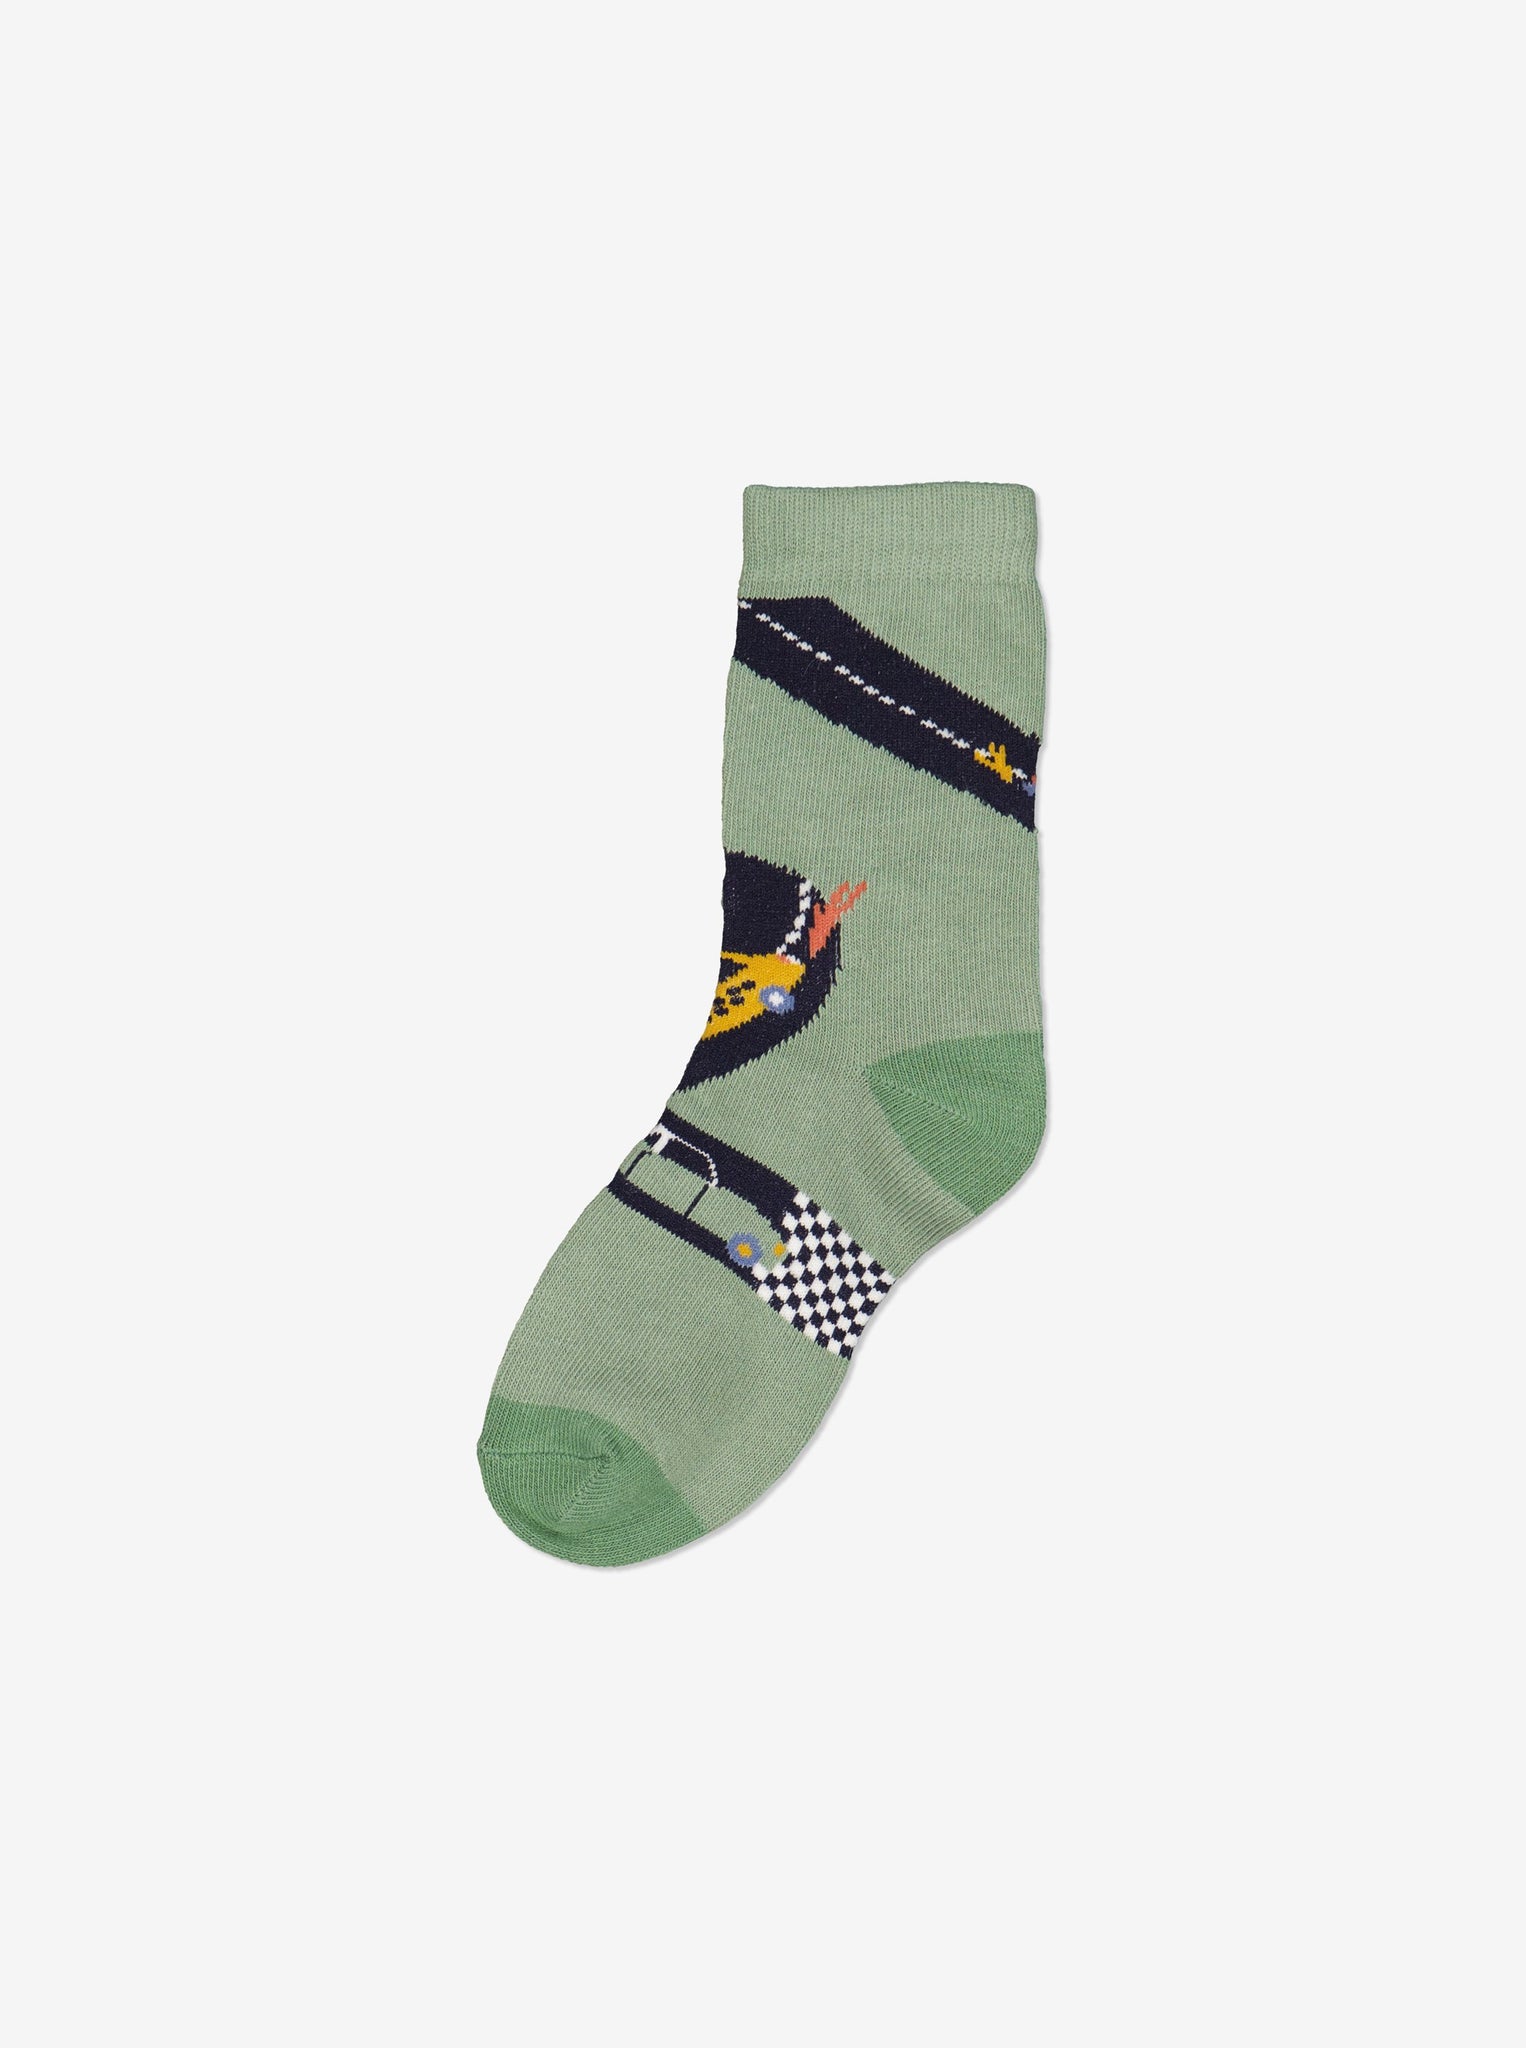  Organic Cotton Cars Kids Socks Multipack from Polarn O. Pyret Kidswear. Made from sustainably sourced materials.